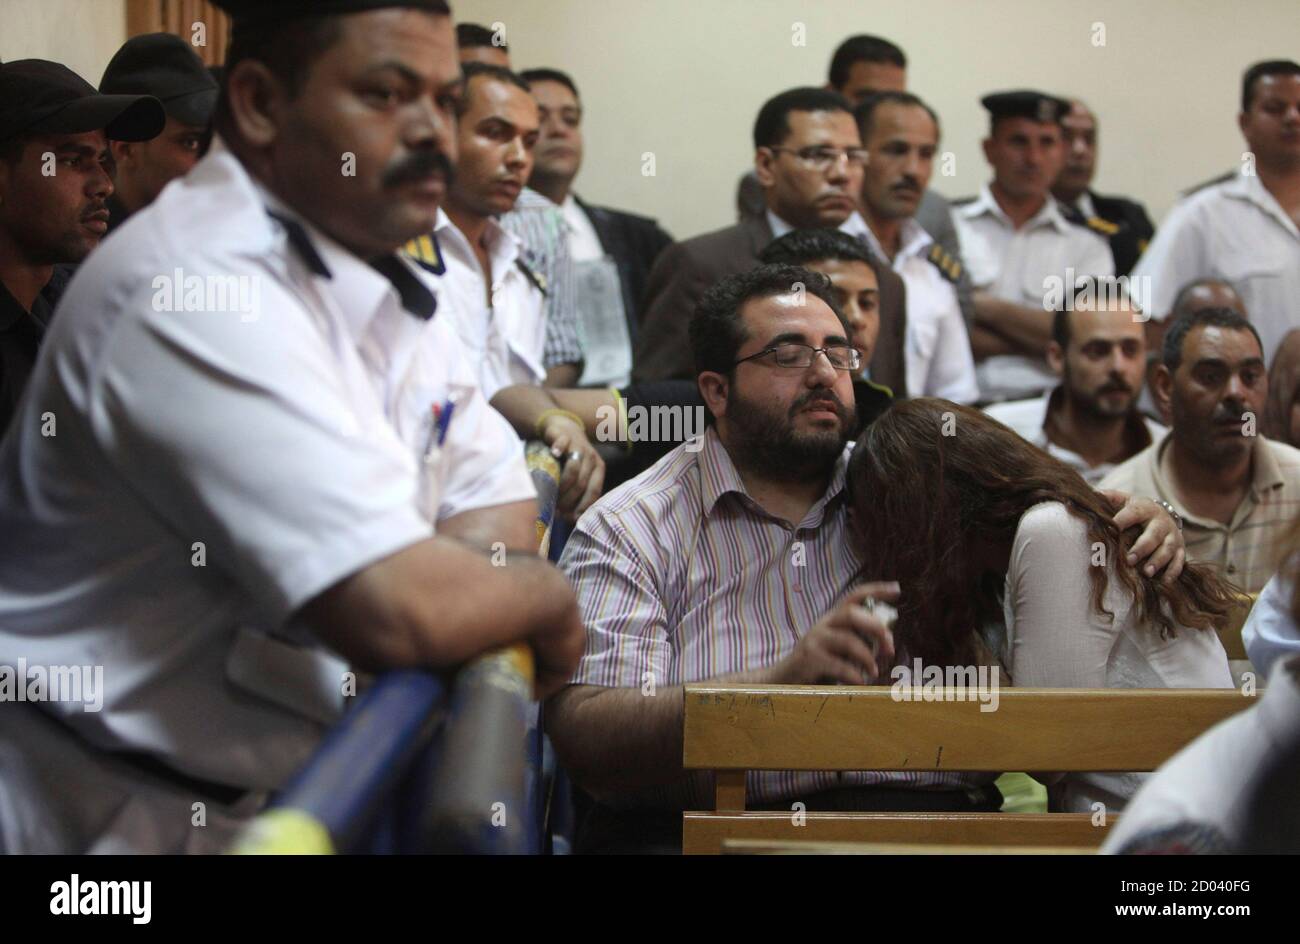 Friends of Egyptian suspects react as they listen to the judge's verdict at a court room during a case against foreign non-governmental organisations (NGOs) in Cairo June 4, 2013. An Egyptian court sentenced at least 15 U.S. citizens in absentia to five years in jail on Tuesday and one American who stood trial was jailed for two years in a case against private foreign groups seeking to promote democracy. Judge Makram Awad also ordered the closure of the NGOs, including the U.S.-based International Republican Institute and the National Democratic Institute. He gave five-year sentences in absent Stock Photo